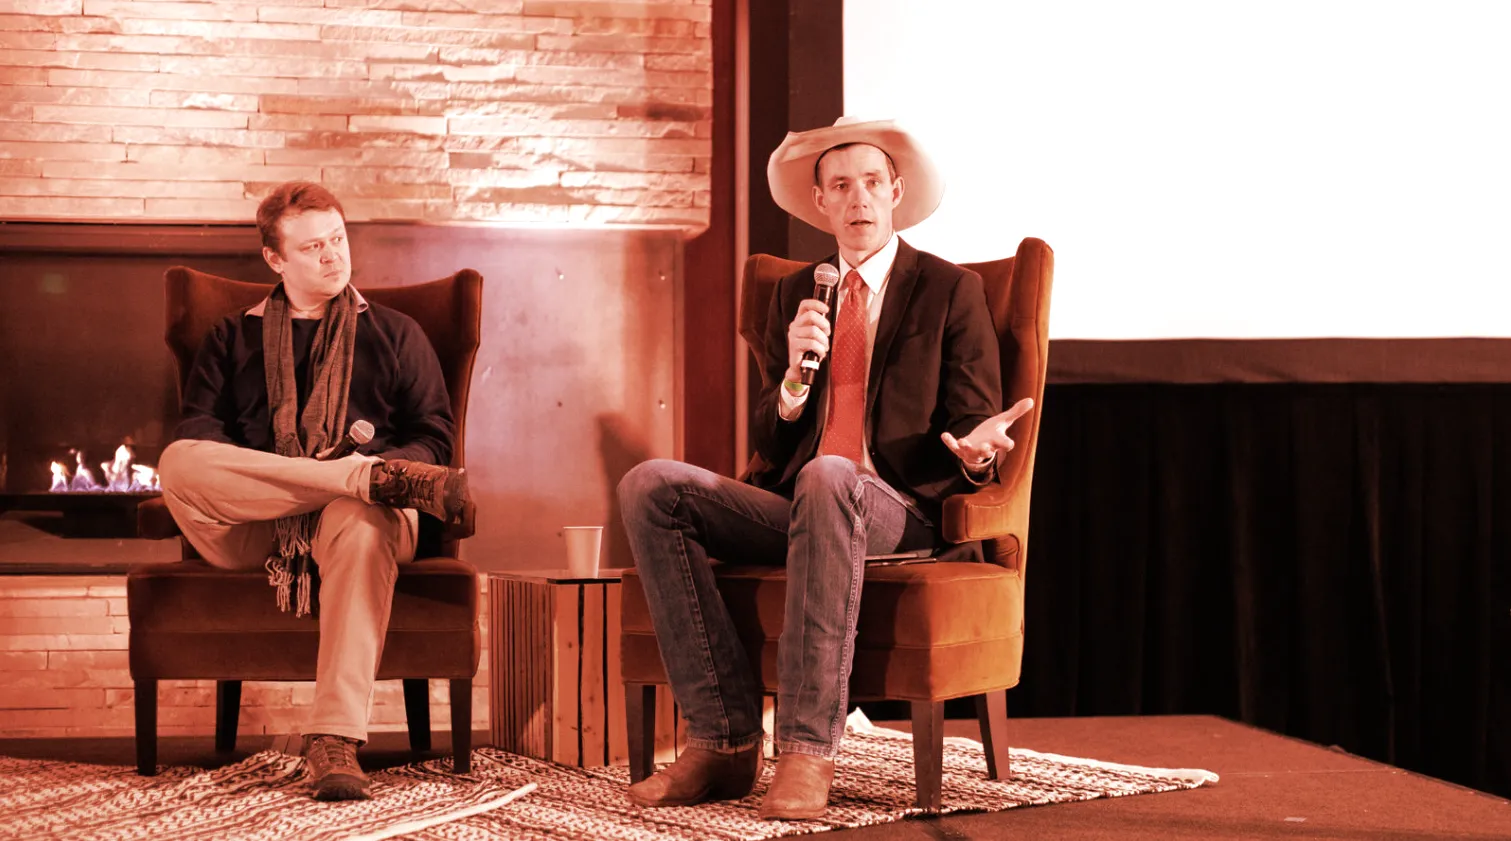 Oregon congressional candidate Matt West (L) and former Wyoming Rep. Tyler Lindholm on a panel about crypto and politics at Camp Ethereal 2022 in Wyoming. (Photo: Chie Endo)